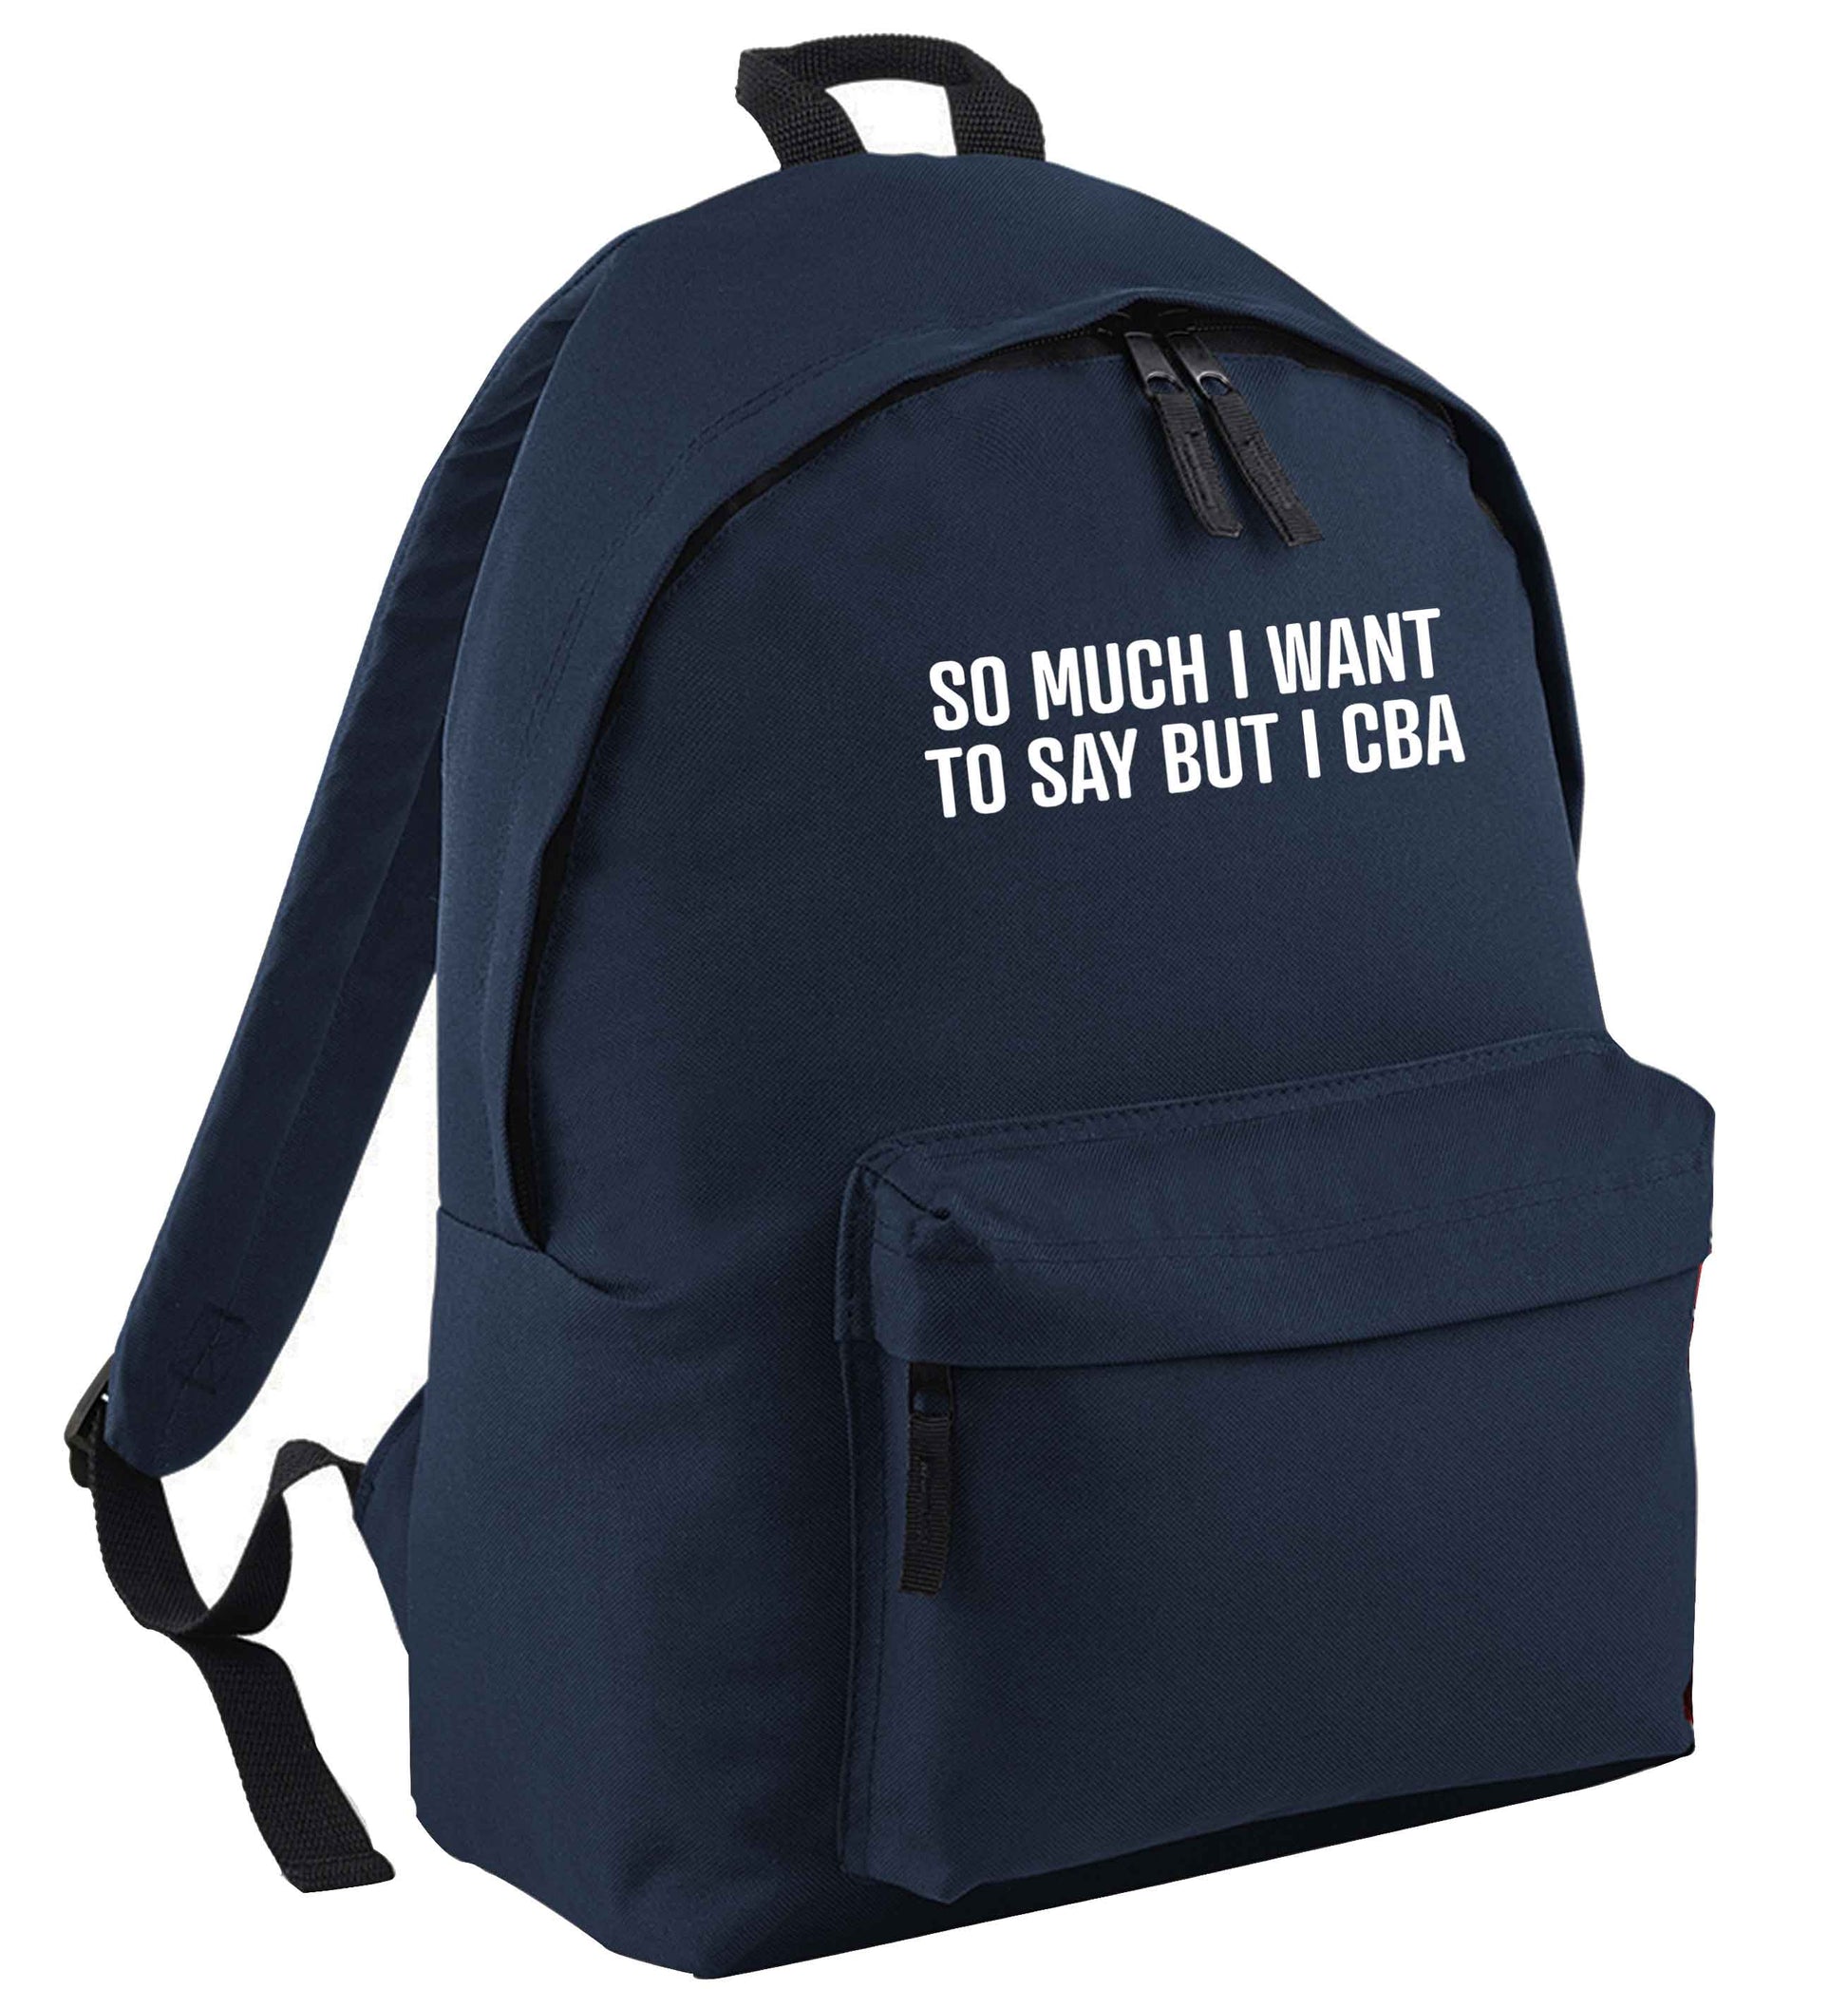 So much I want to say I cba  navy adults backpack